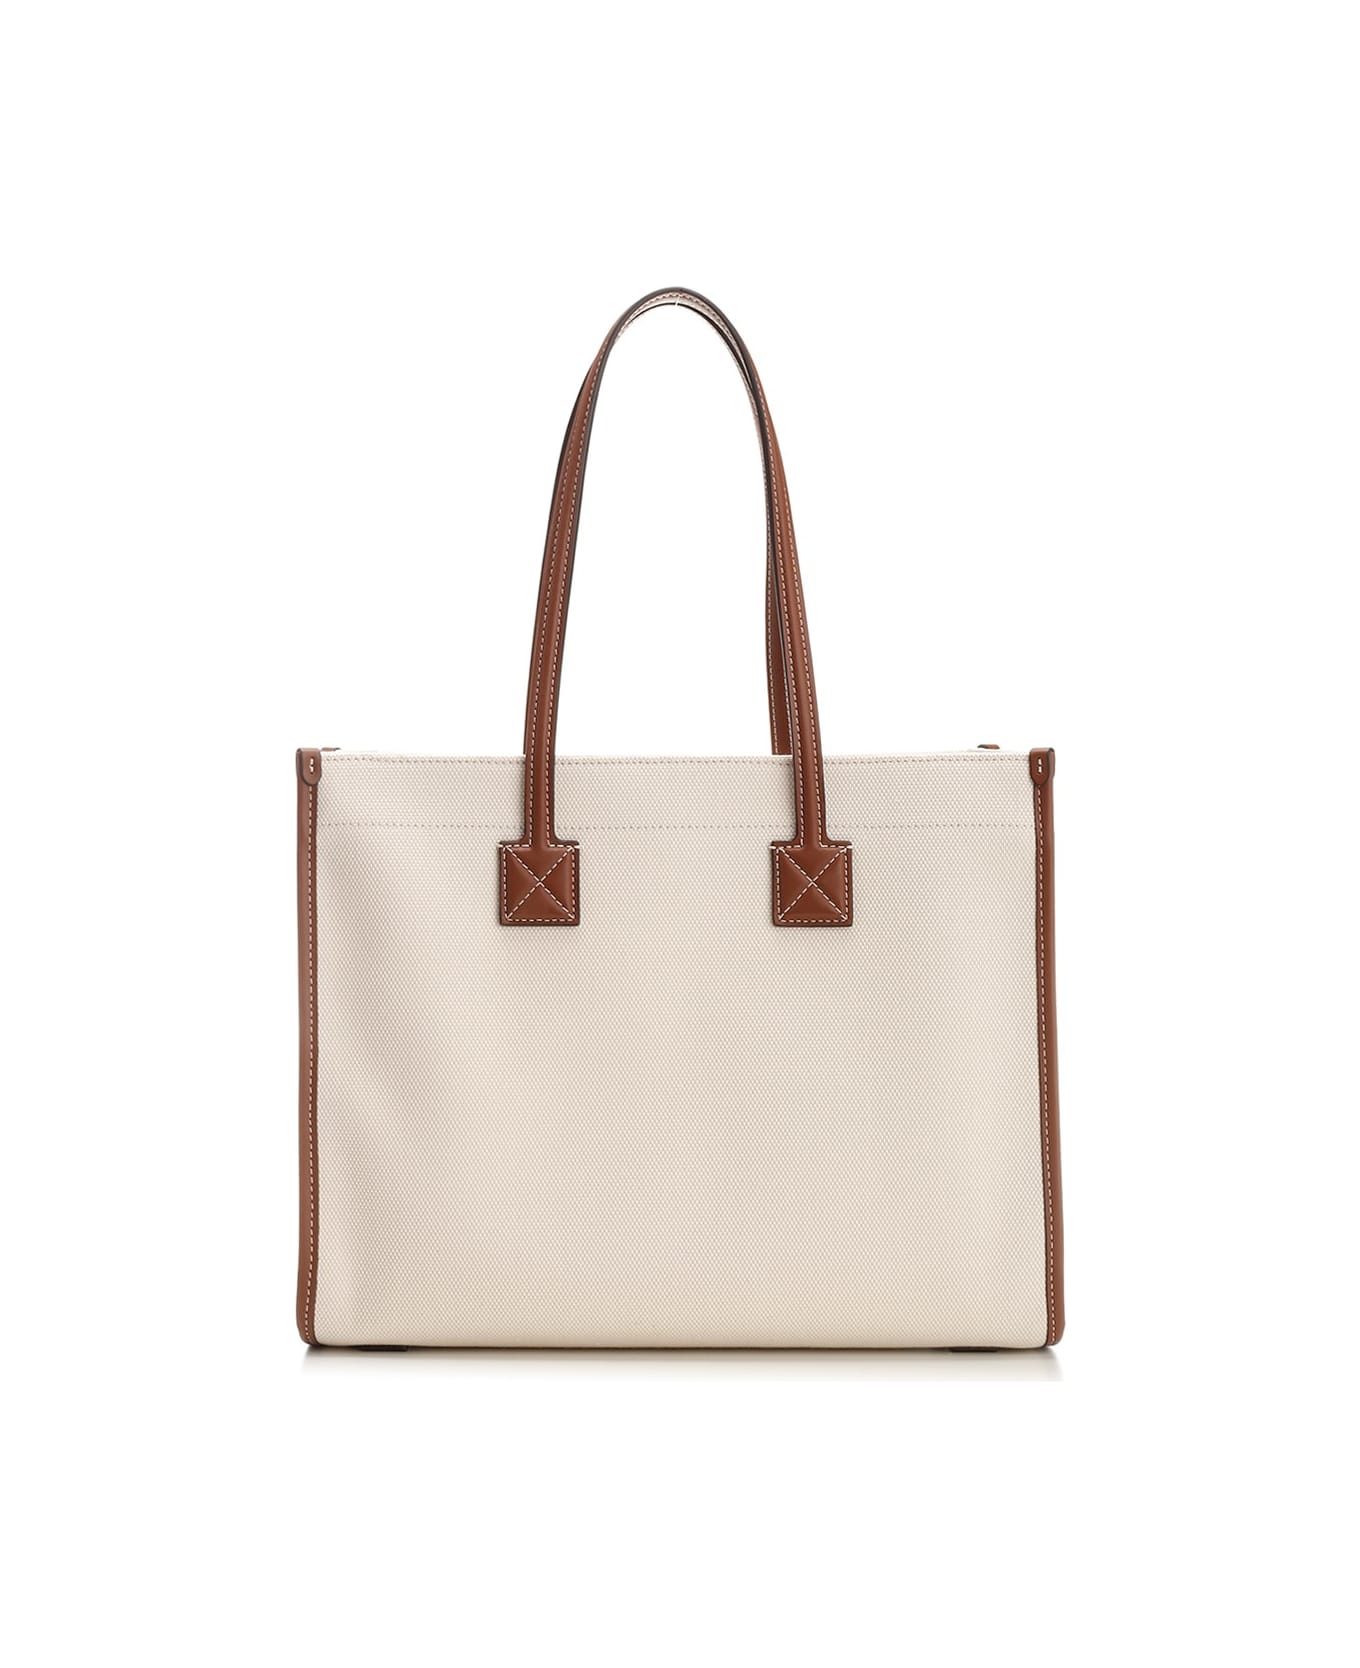 Burberry Tote Bag In Canvas - White